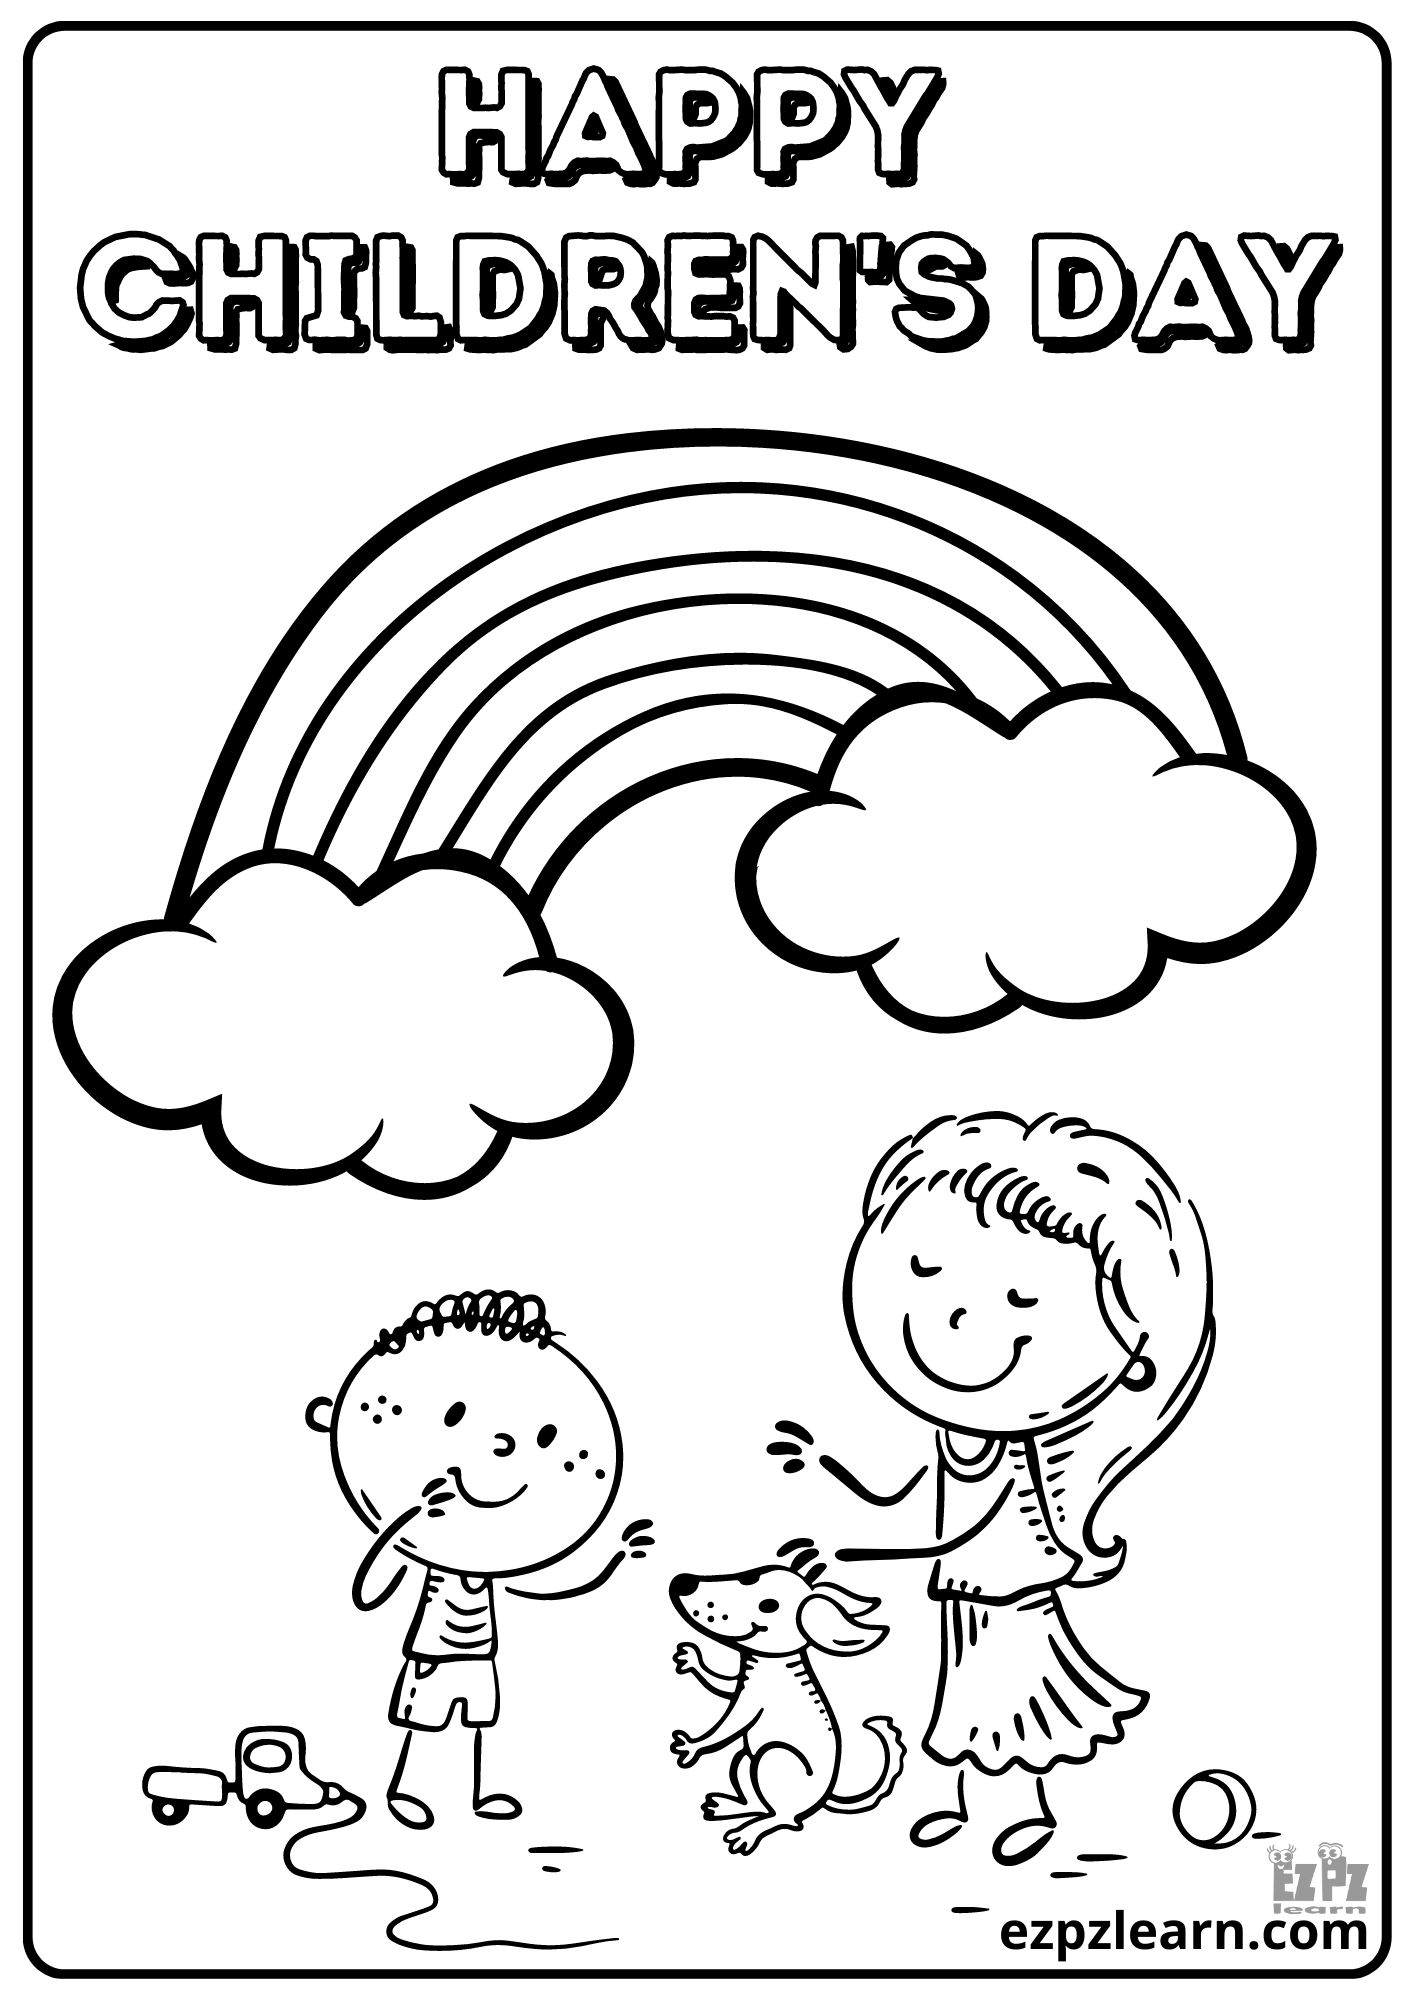 Children's Day Chart Idea| Easy drawing - YouTube | Children's day, Easy  drawings, Happy children's day